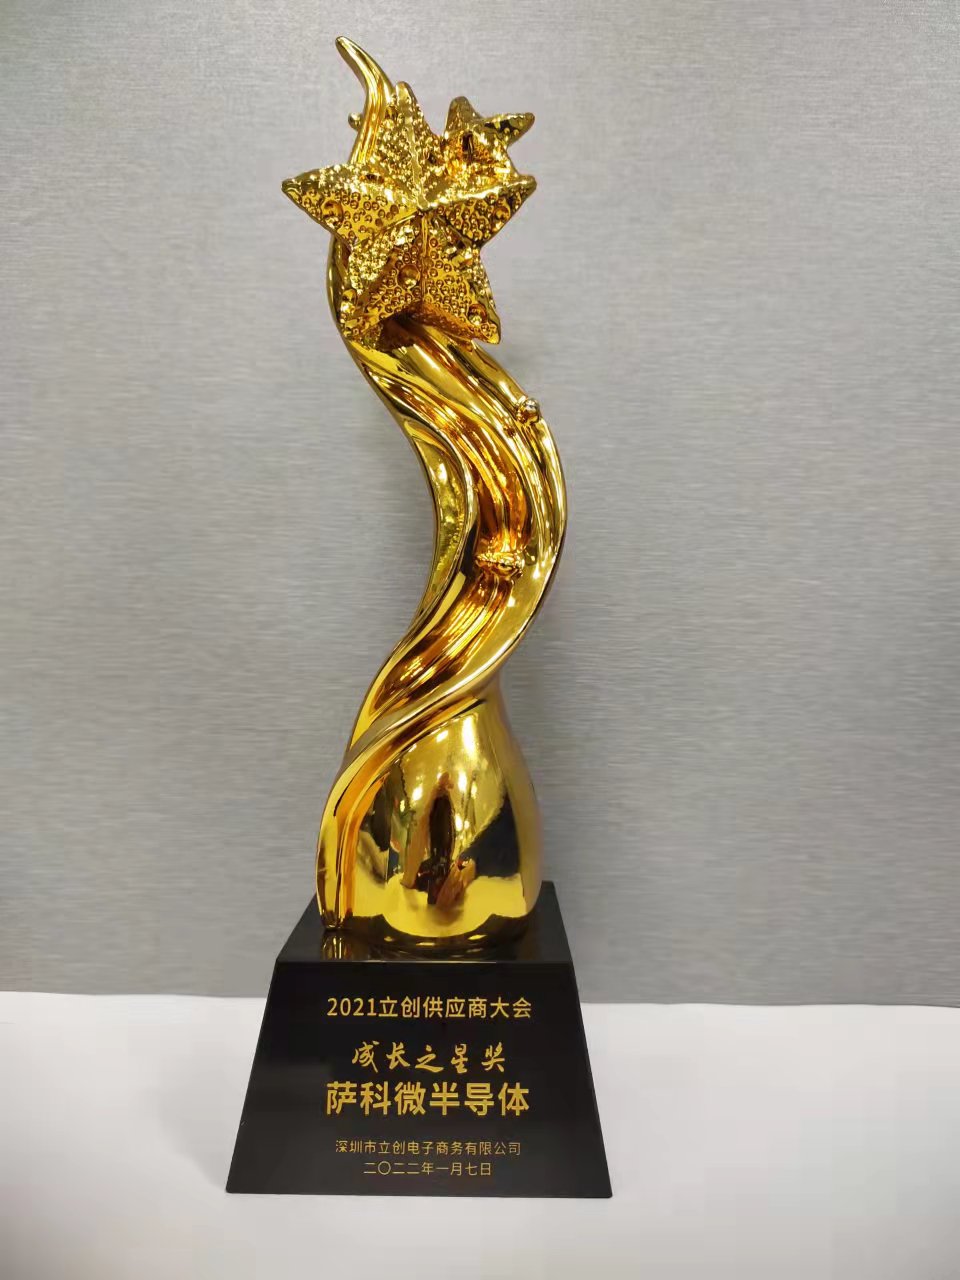 Won the "Growing Star Award" at the 2021 Lichuang Supplier Conference